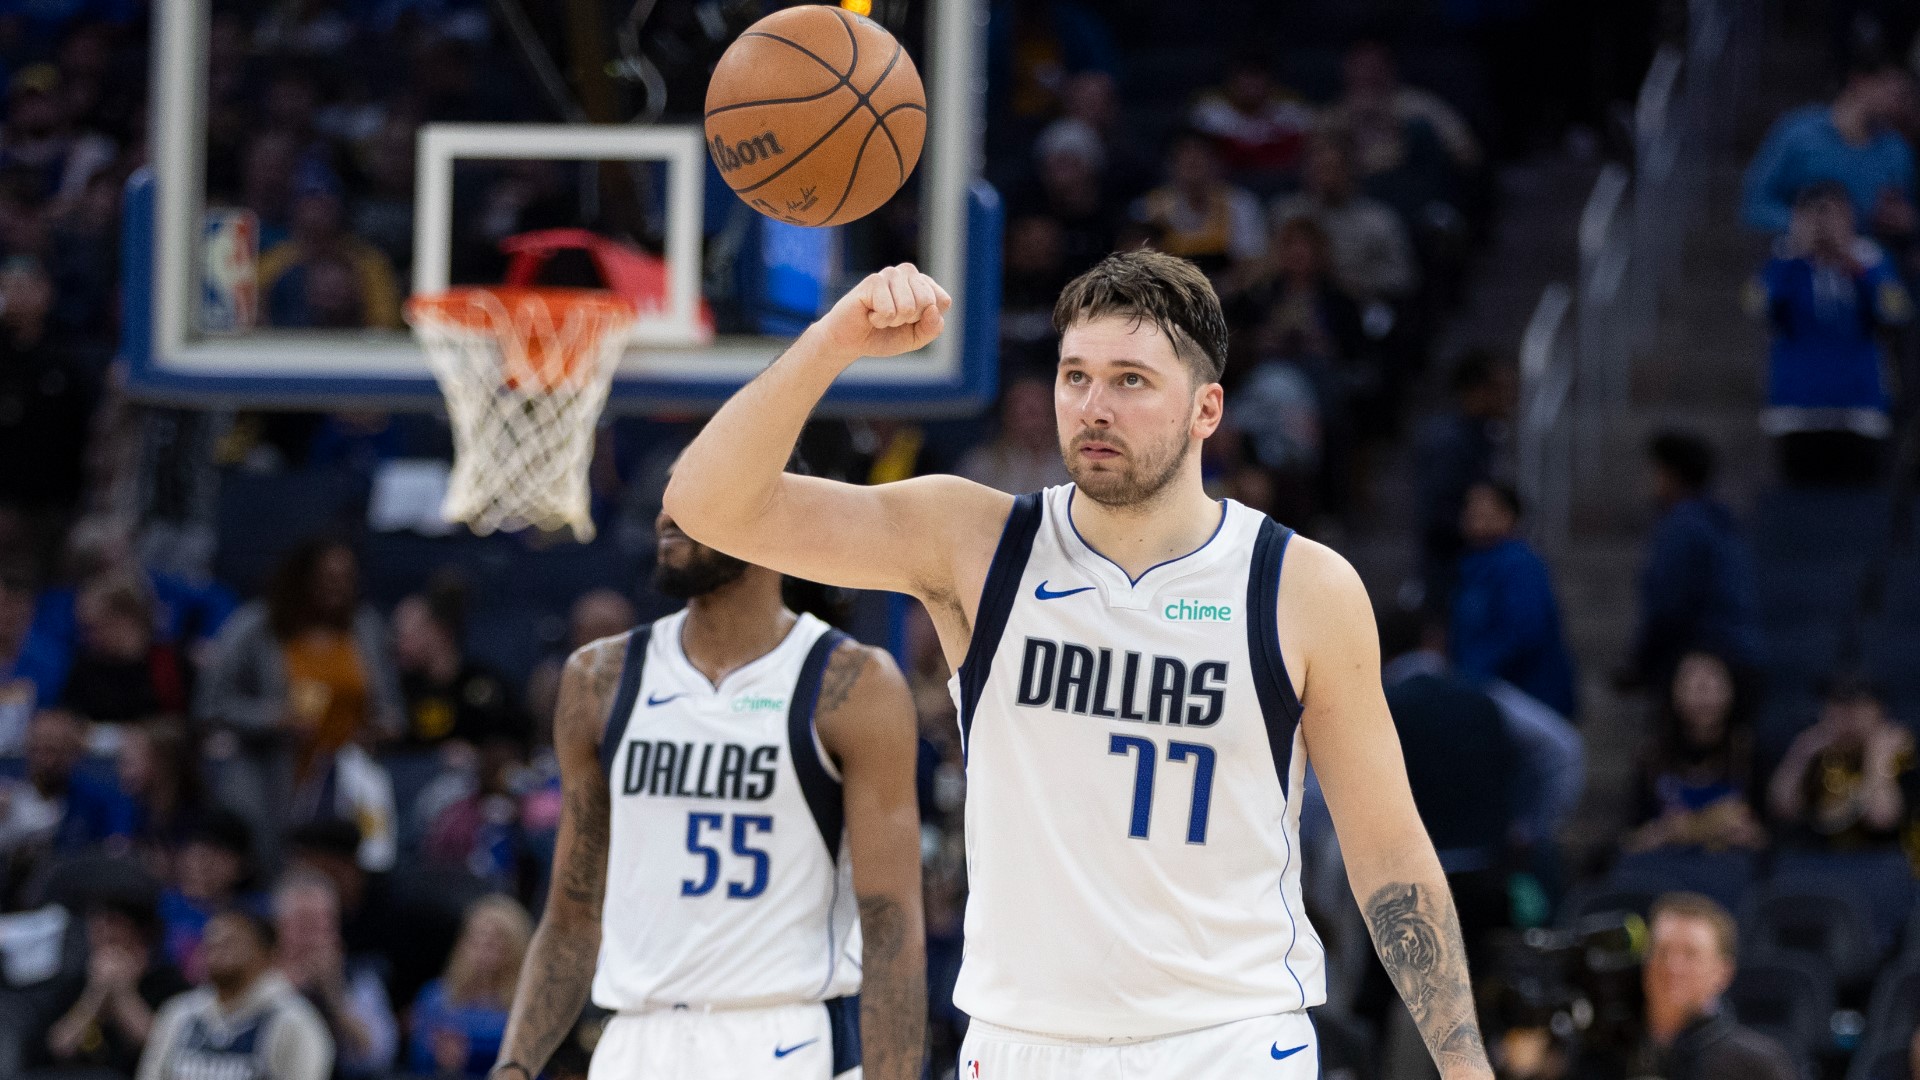 Luka Doncic scored 25 of his 39 points in the second half in his return to the lineup and the Dallas Mavericks beat the Golden State Warriors 132-122.